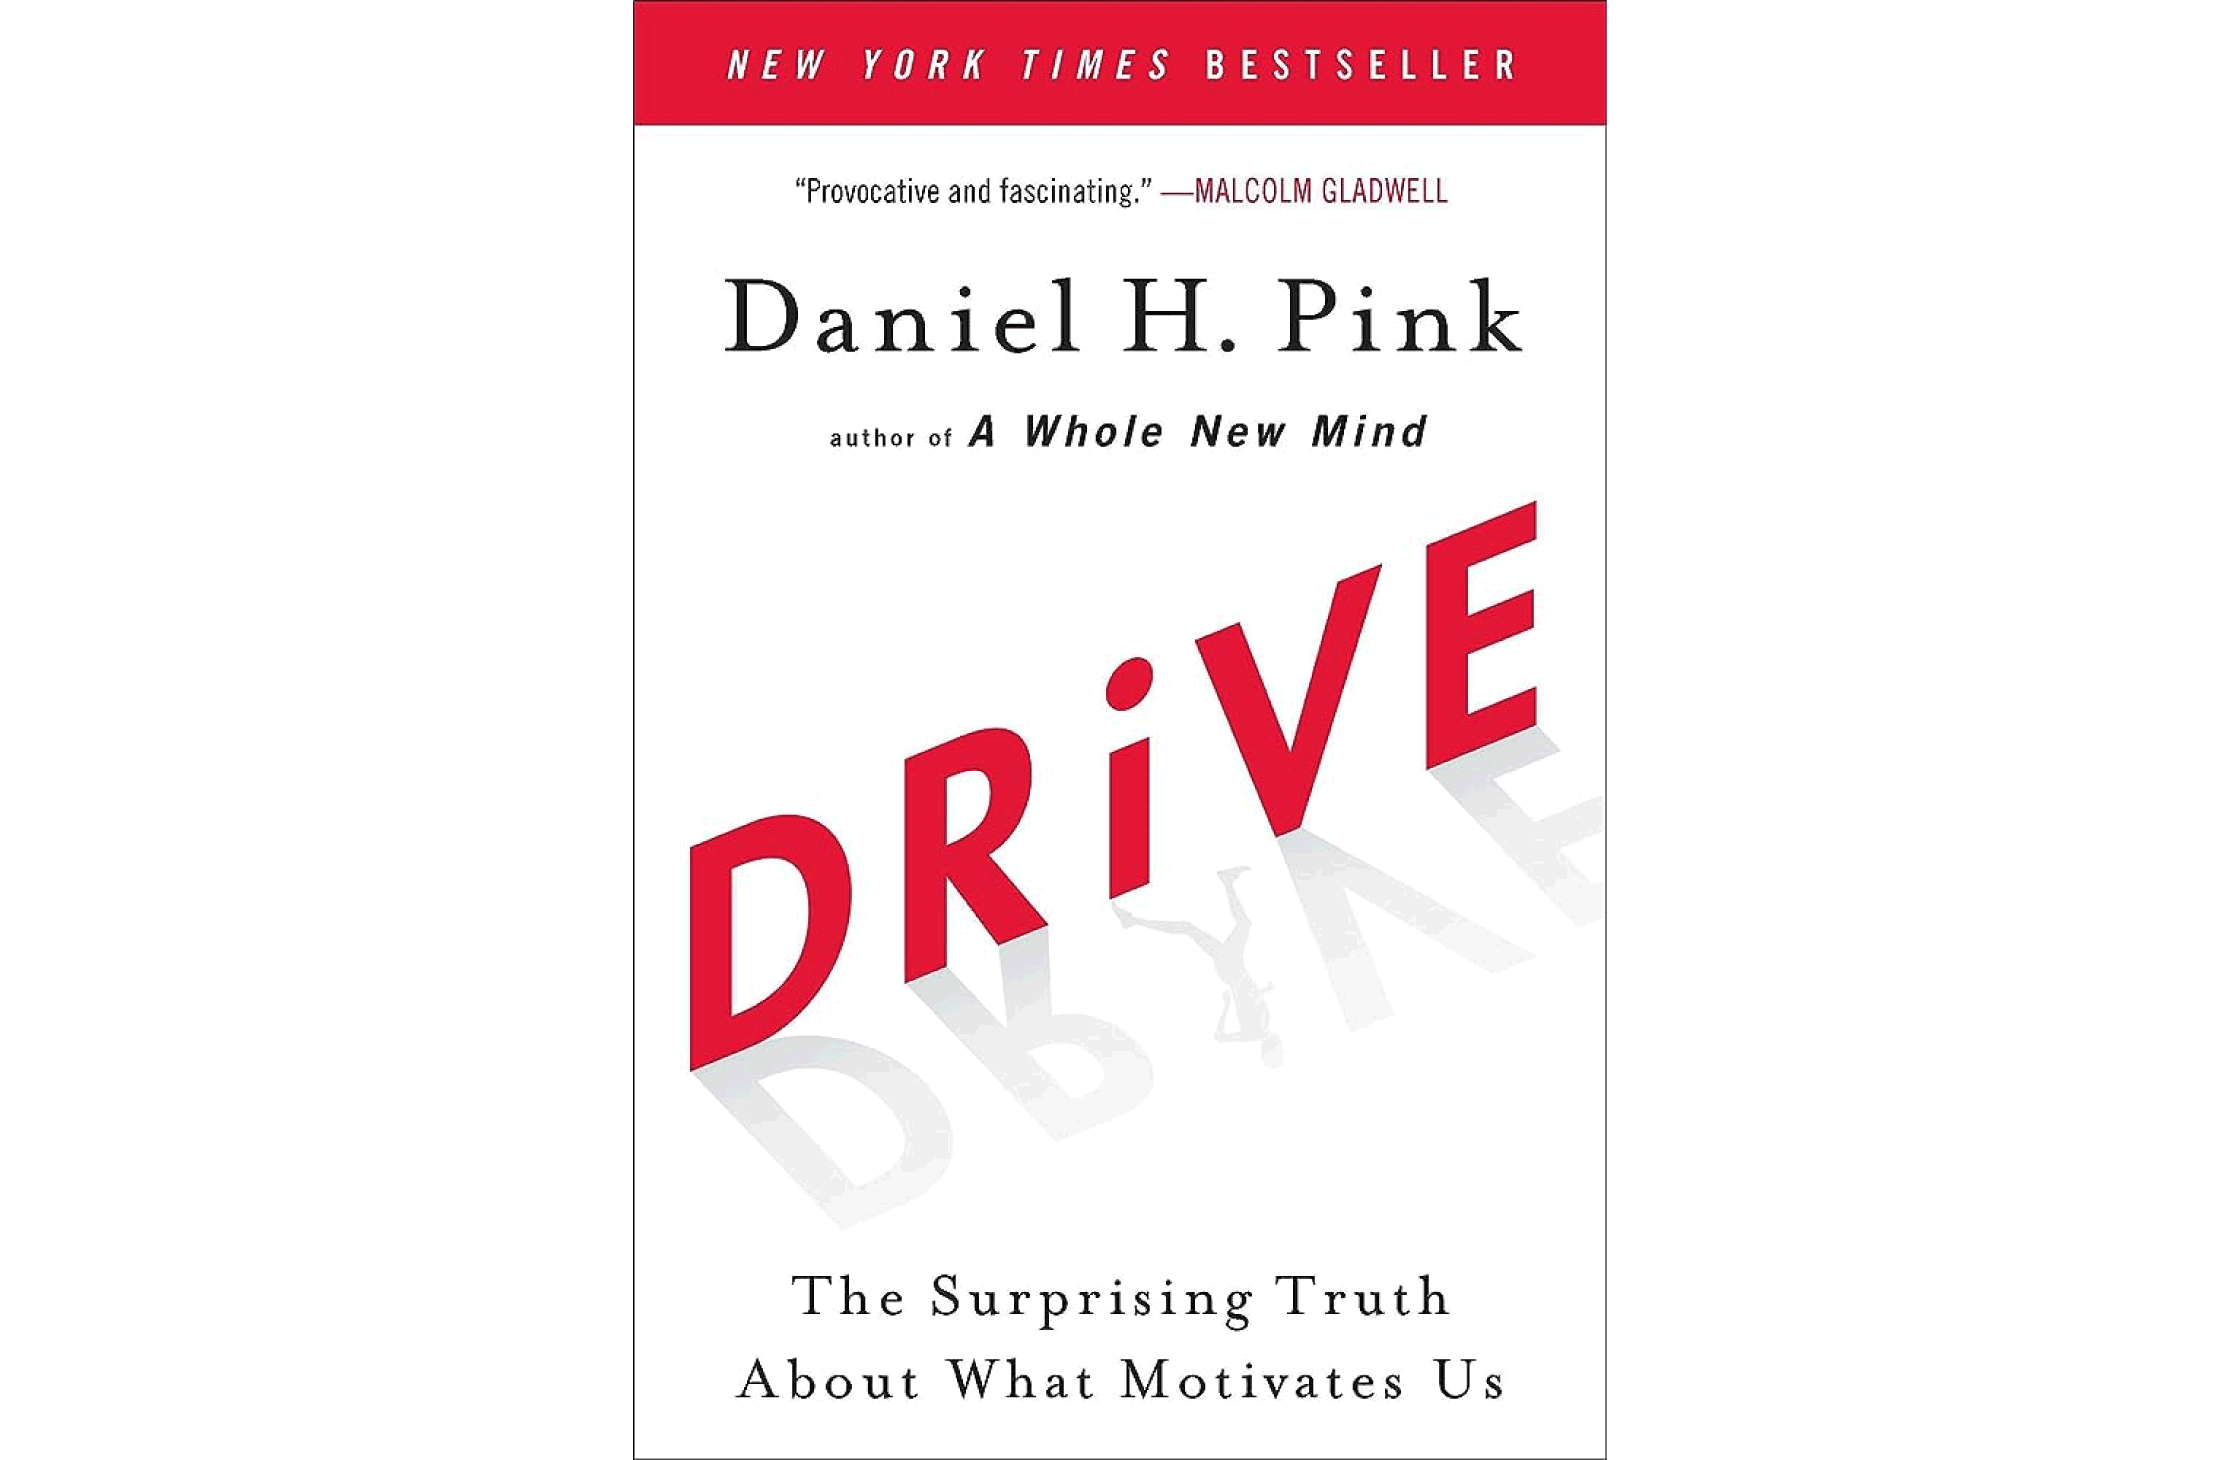 Summary: Drive: The Surprising Truth About What Motivates Us by Daniel H. Pink